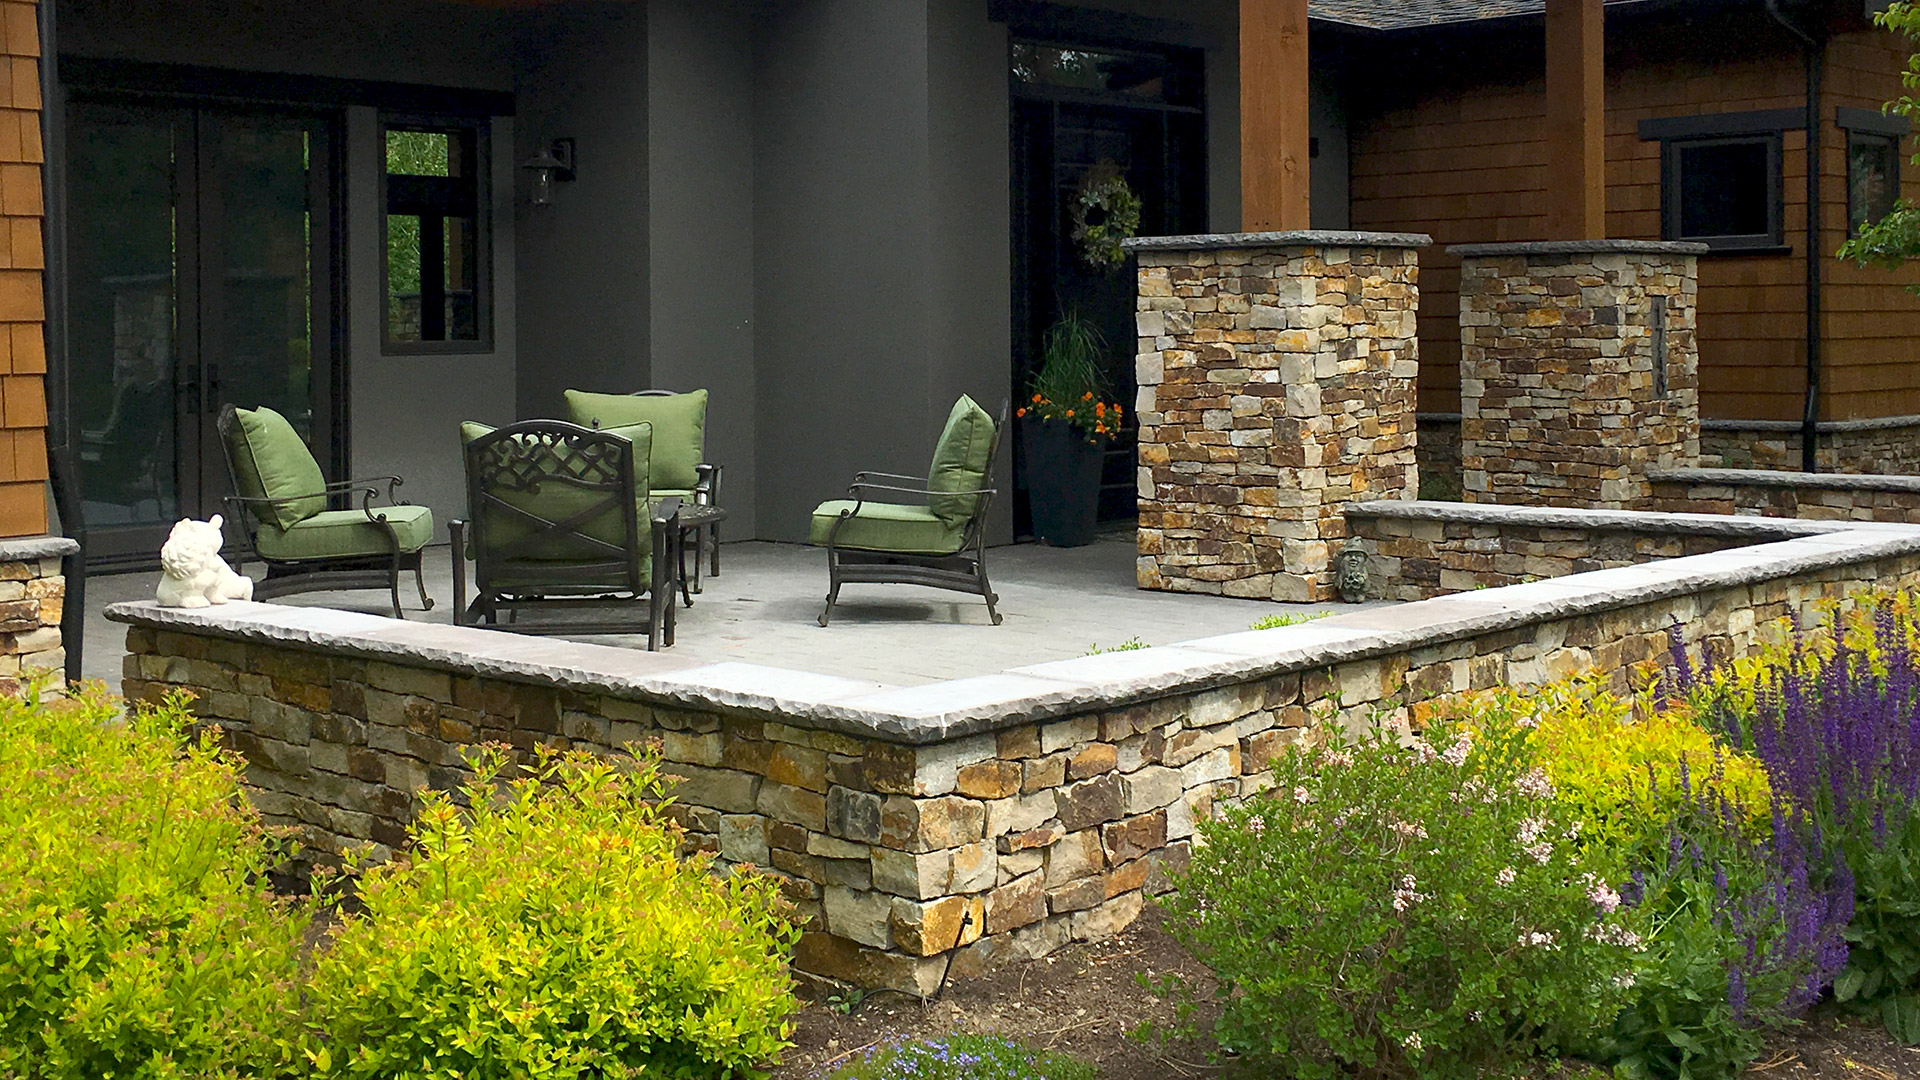 Stone seat wall and columns